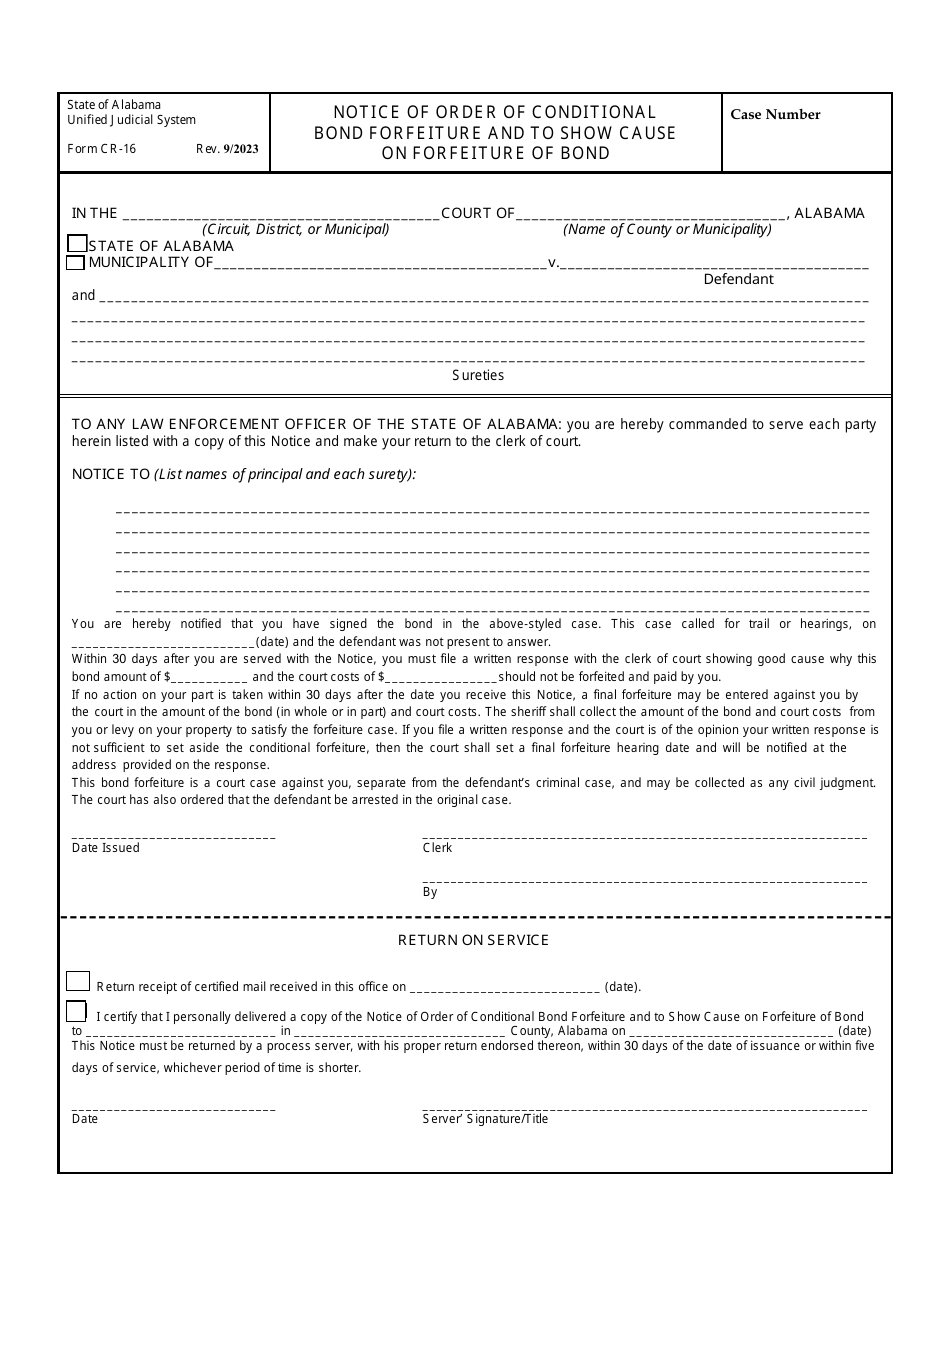 Form CR-16 Notice of Order of Conditional Bond Forfeiture and to Show Cause on Forfeiture of Bond - Alabama, Page 1